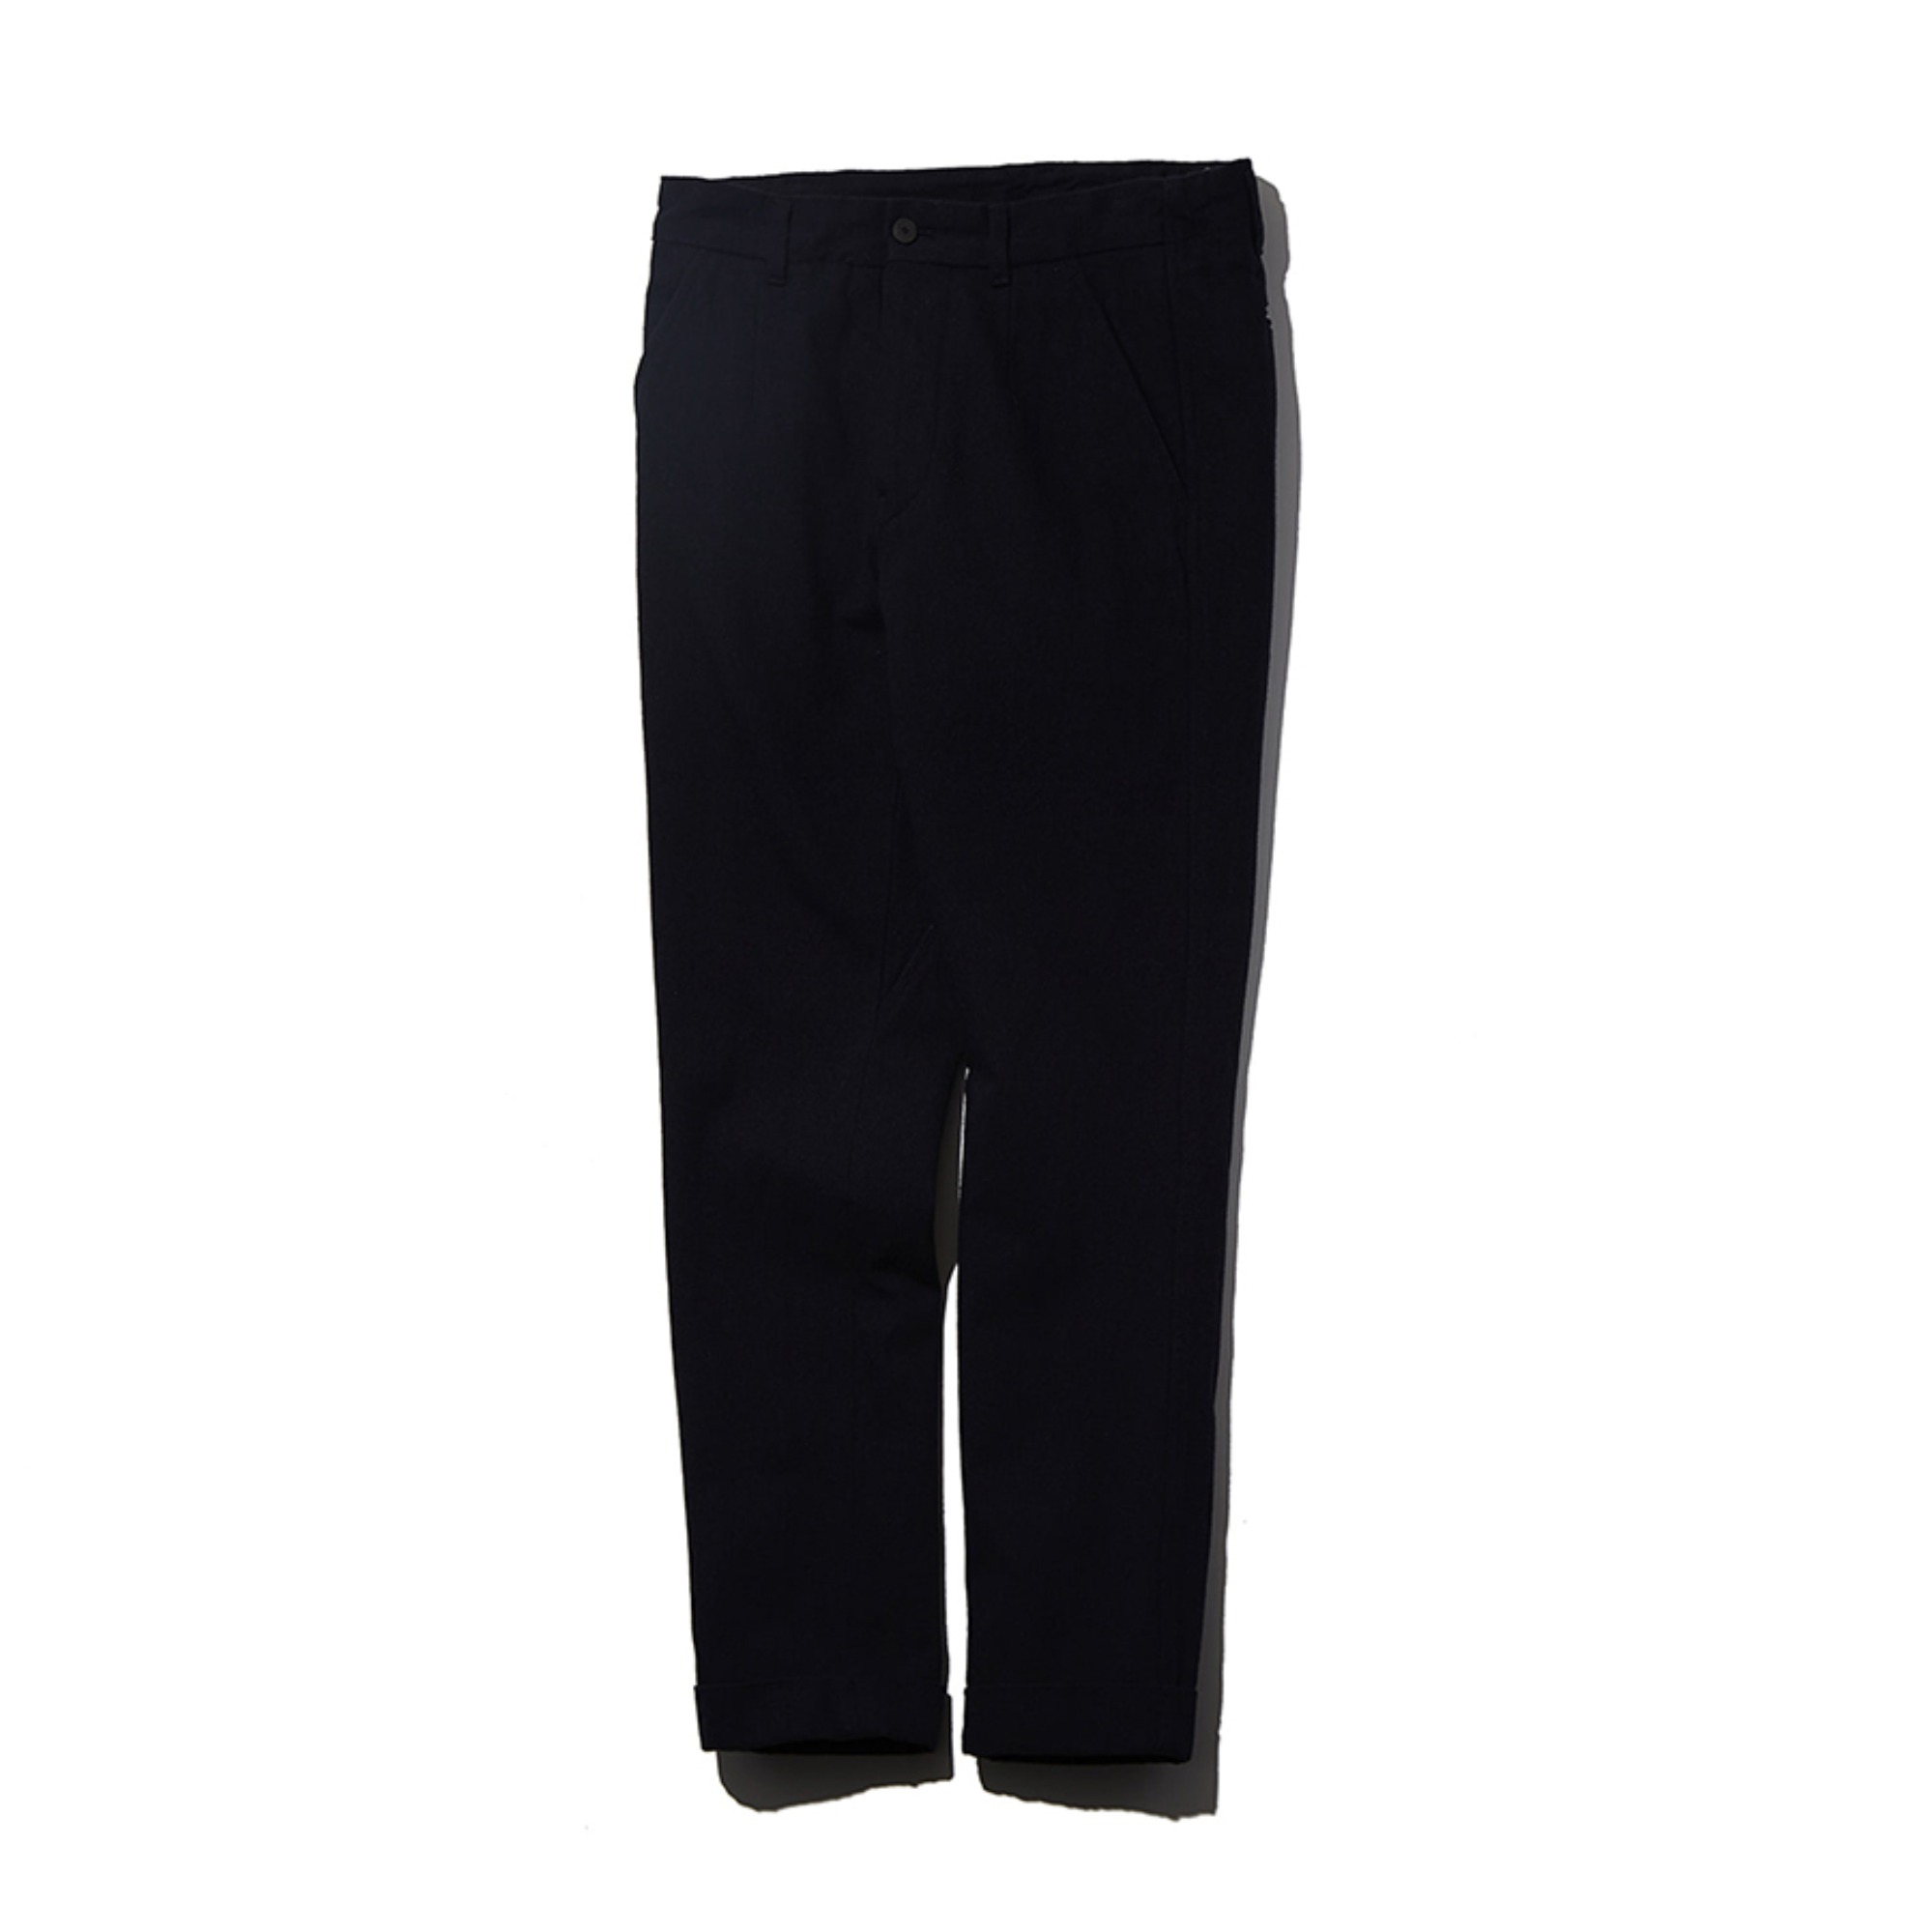 THE DOCUMENT TROUSERS (DARK NAVY)